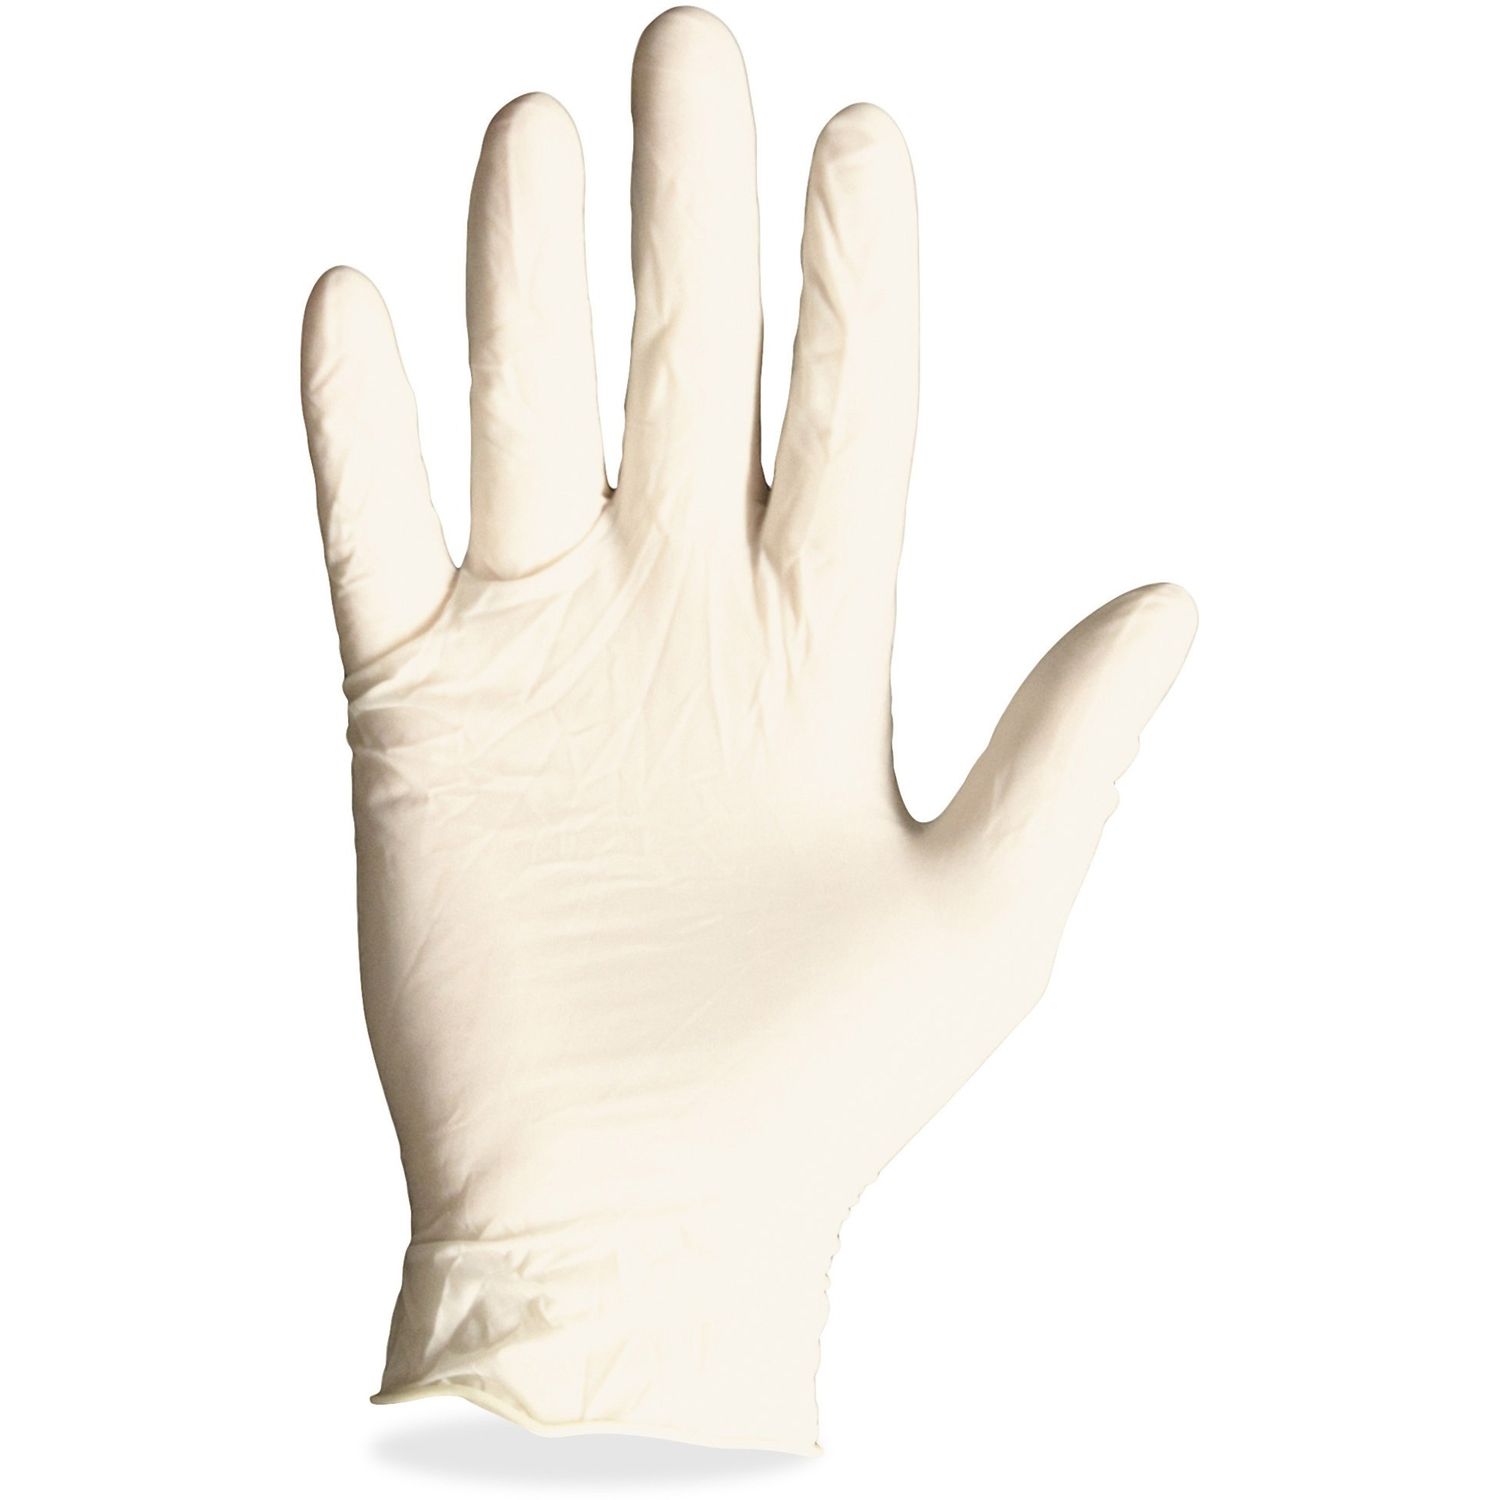 Latex General-Purpose Gloves Large Size, Unisex, Latex, Natural, Ambidextrous, Disposable, Powder-free, Comfortable, Snug Fit, For Cleaning, Food Handling, 1000 / Carton, 3 mil Thickness